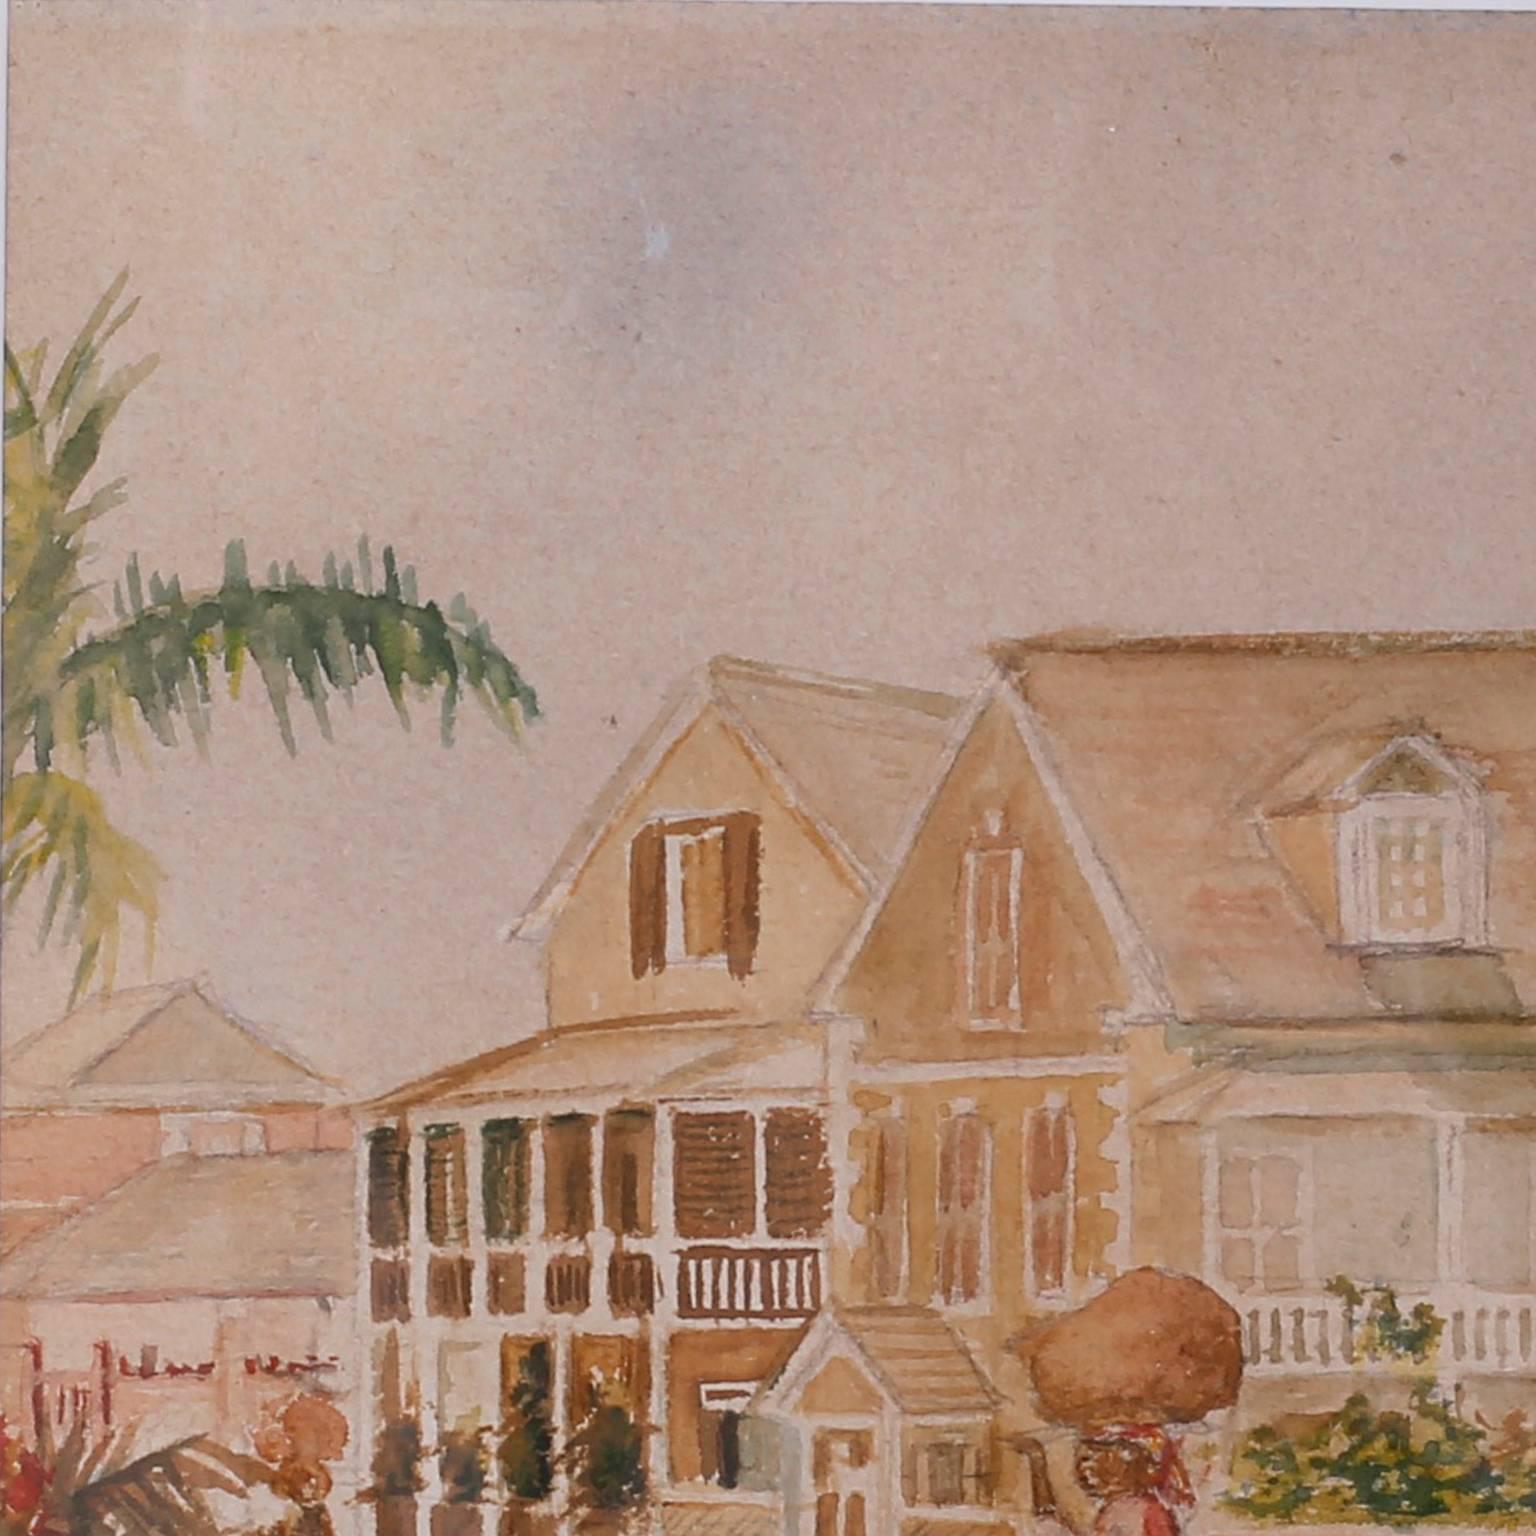 19th century tropical West Indies watercolor on paper depicting a moment in
time on a quiet street complete with houses, palm trees, flowers and a
woman carrying a bundle on her head. Possibly the Bahamas. Expertly painted and under
preservation